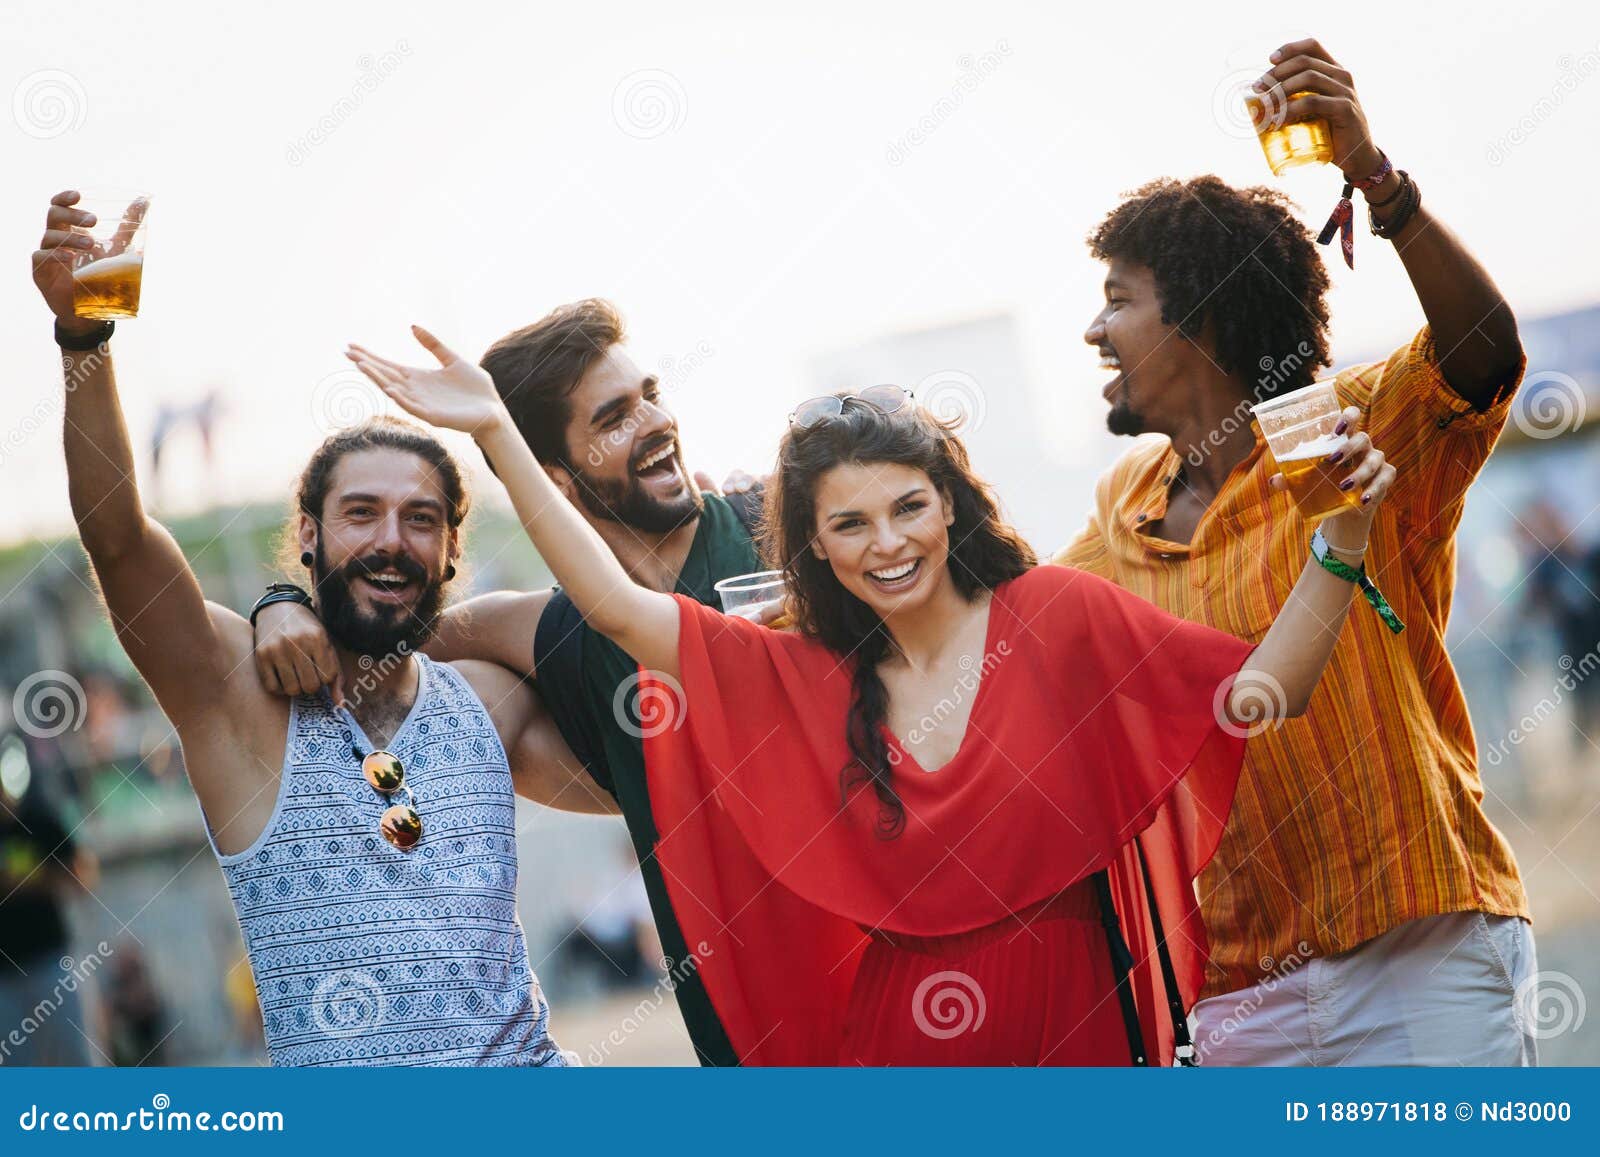 Group of Happy Friends People Having Fun Together Outdoors Stock Photo ...